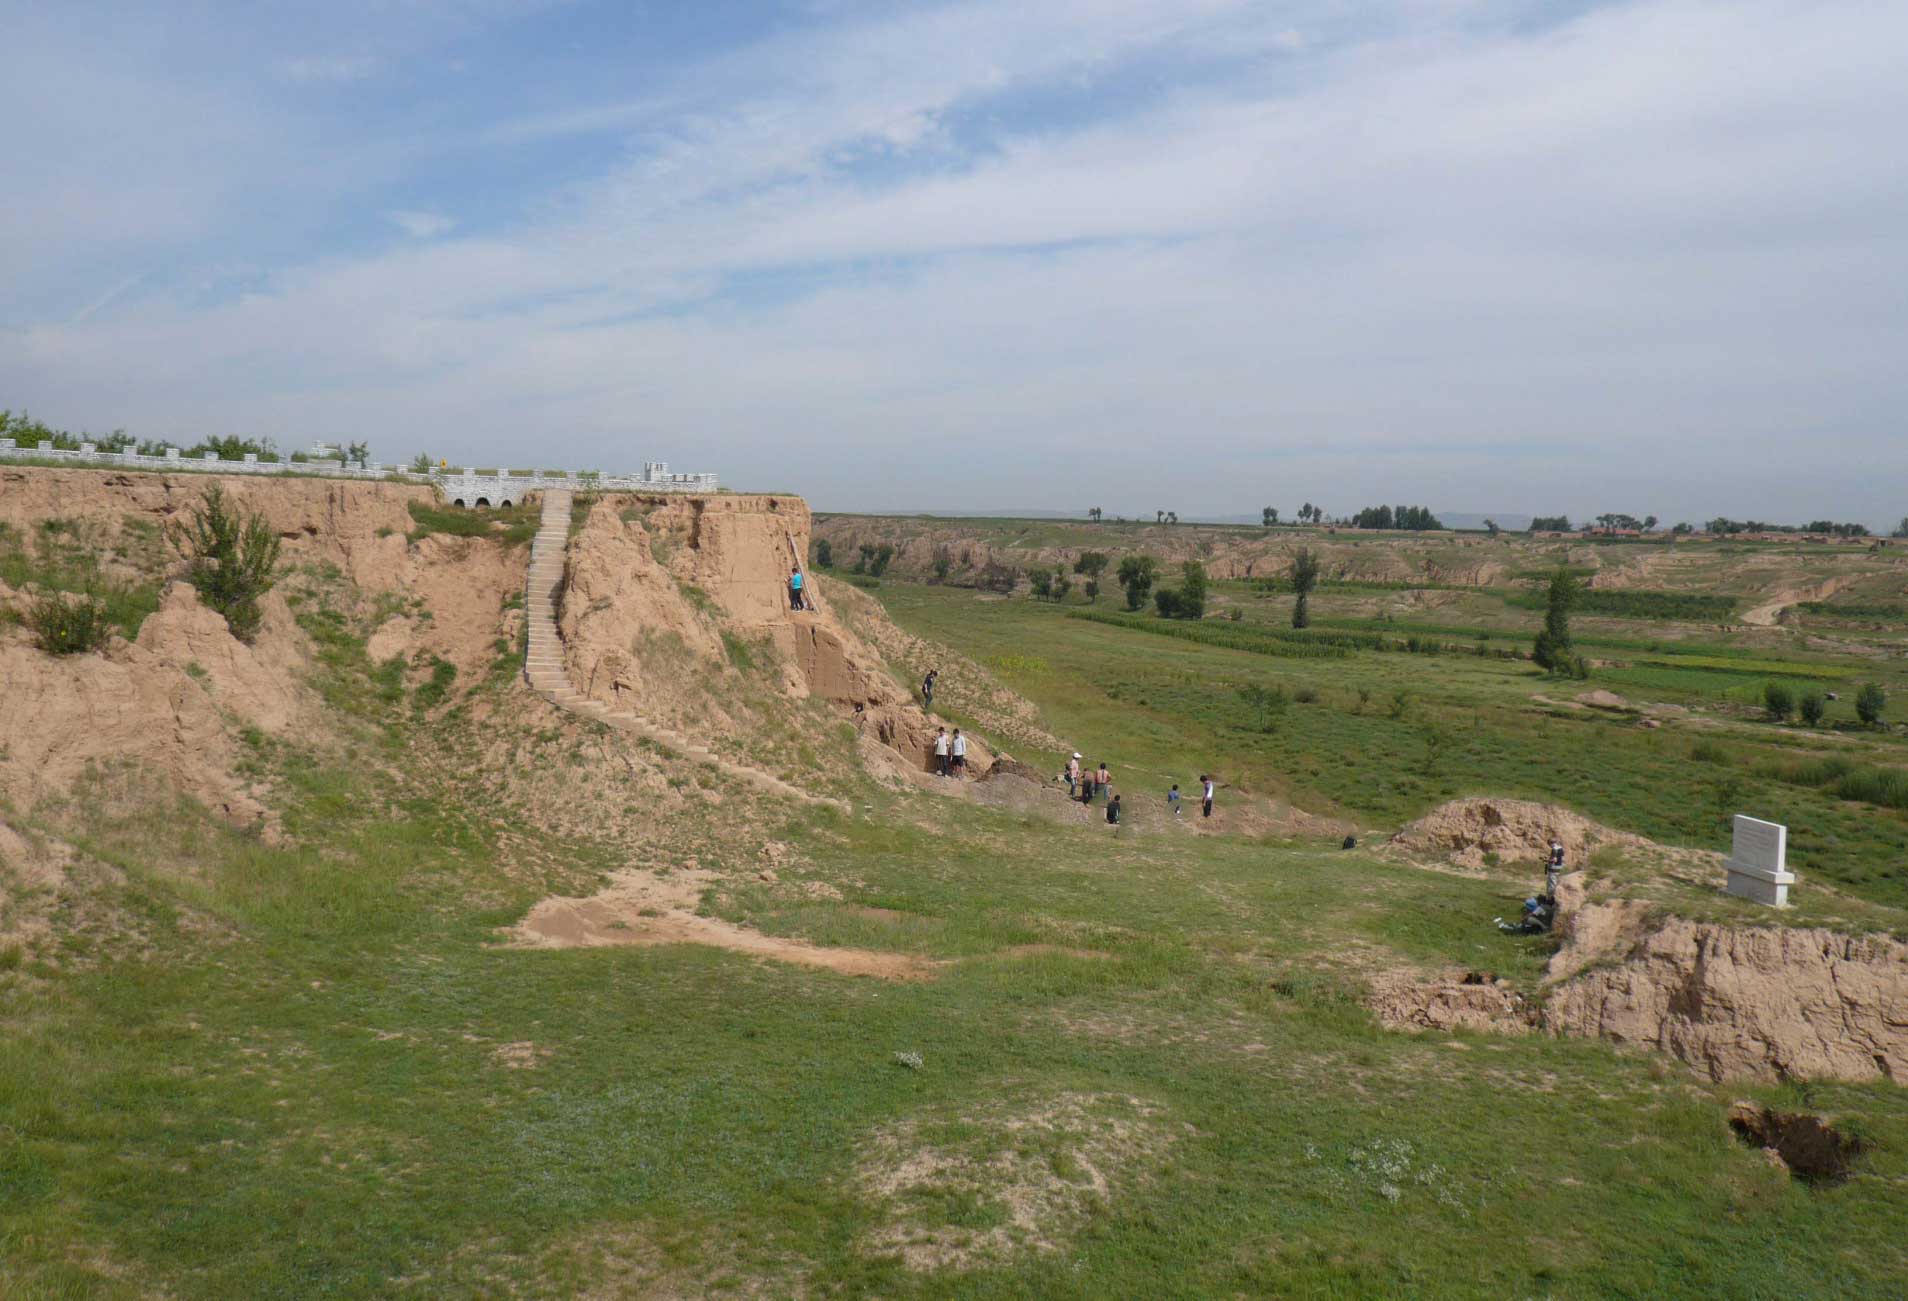 A sharp cliff face composed of tan sediment, with archaeologists working on a dig and surrounding green grassy valley